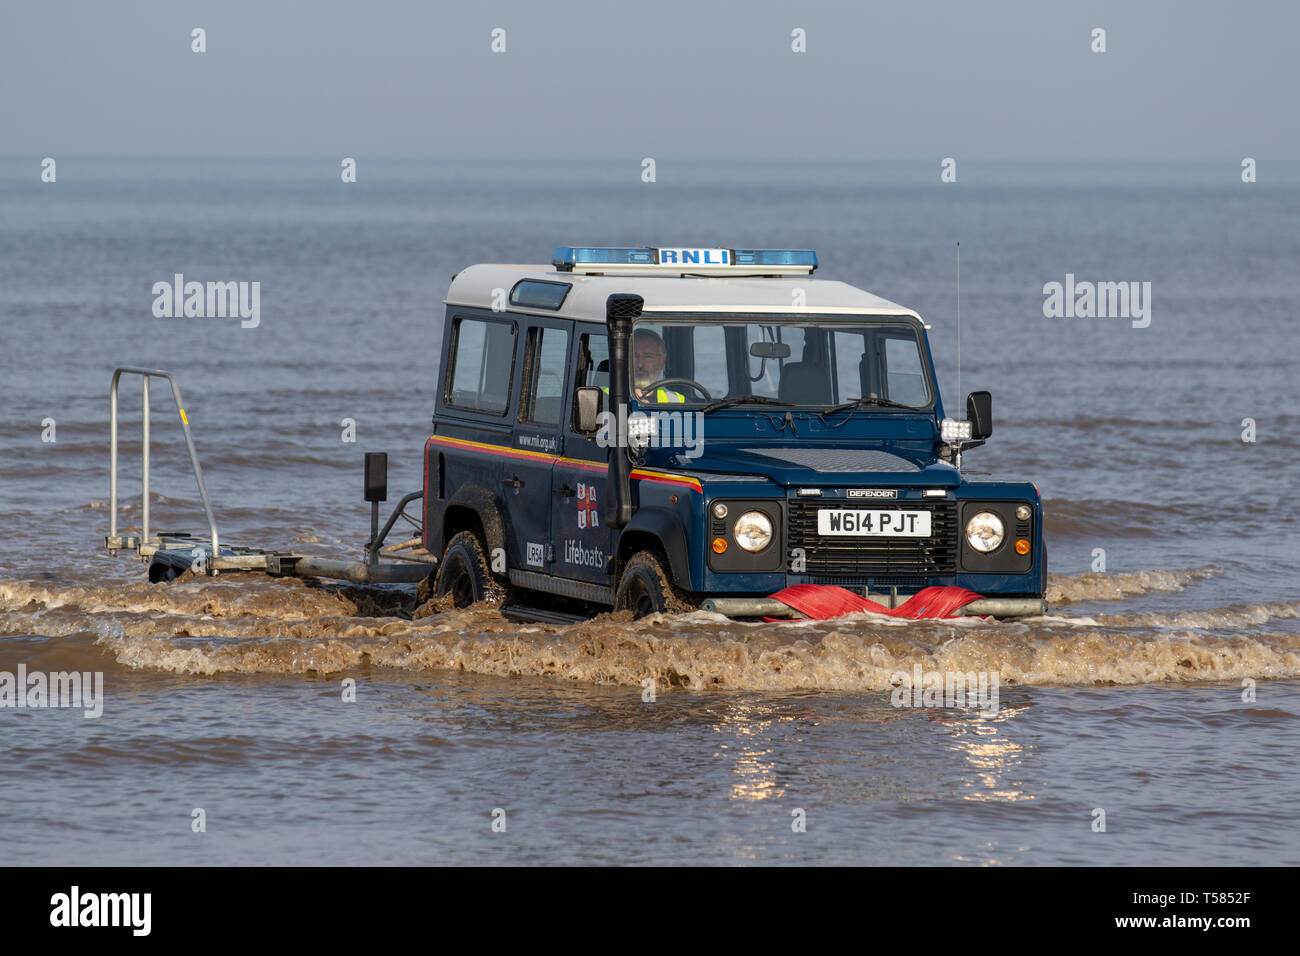 LifeGuard off-road beach & trail patrol rescue vehicle H M Coastguards land rover, with snorkel exhaust, Lifeguards and lifeboat crew join forces in  lifesaving training exercises in the sea at Blackpool, UK Stock Photo